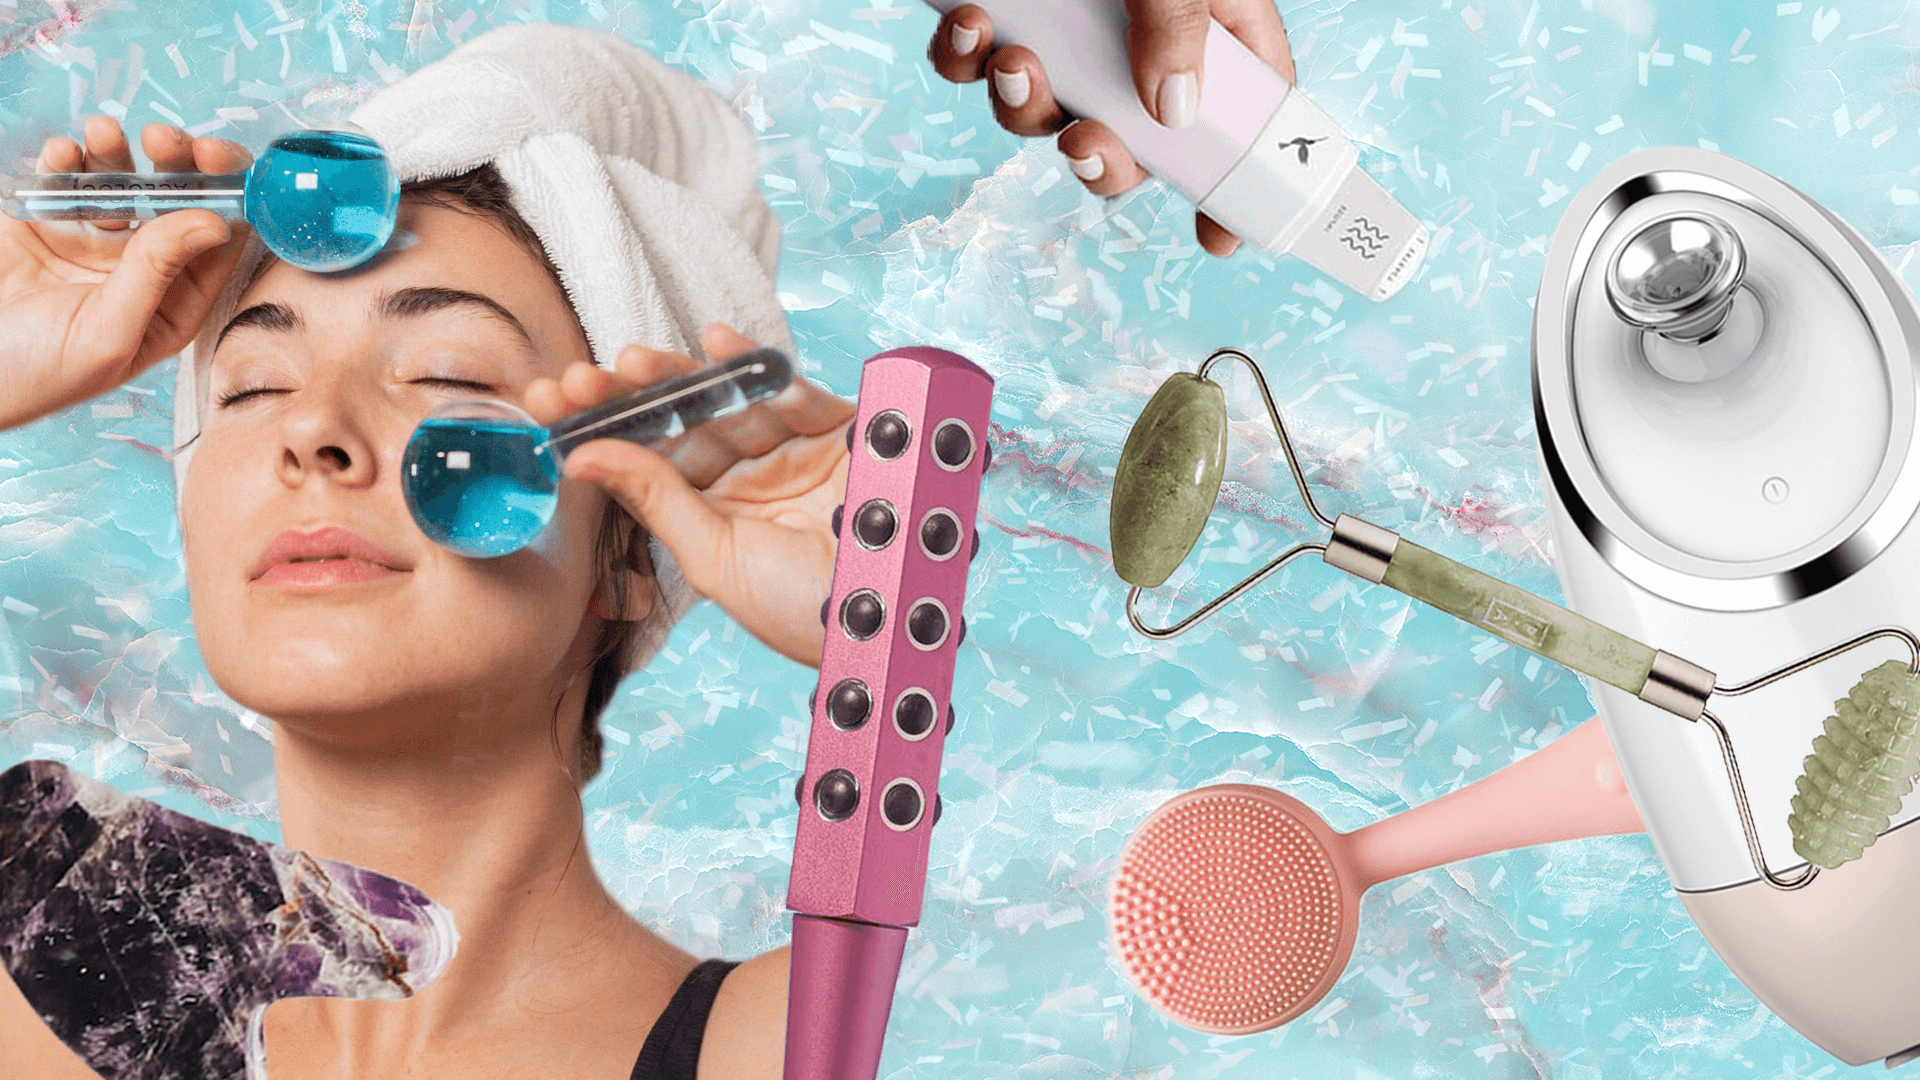 8 Facial Tools & Devices You Need to Add to Your Skincare Routine